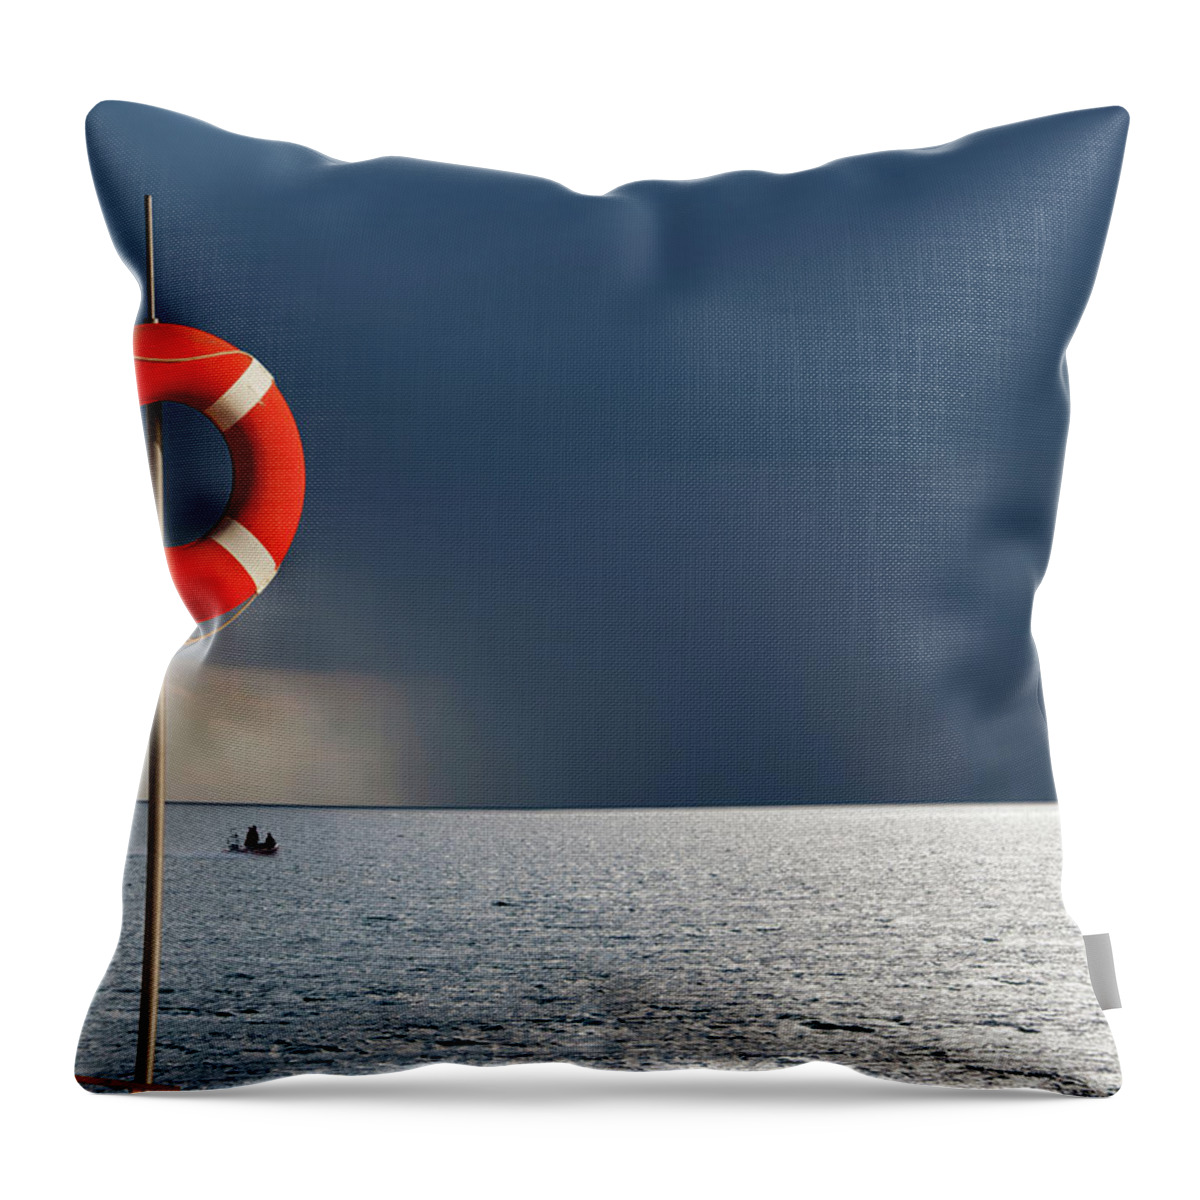 Pole Throw Pillow featuring the photograph Life Ring Against Dramatic Sky by Luxx Images